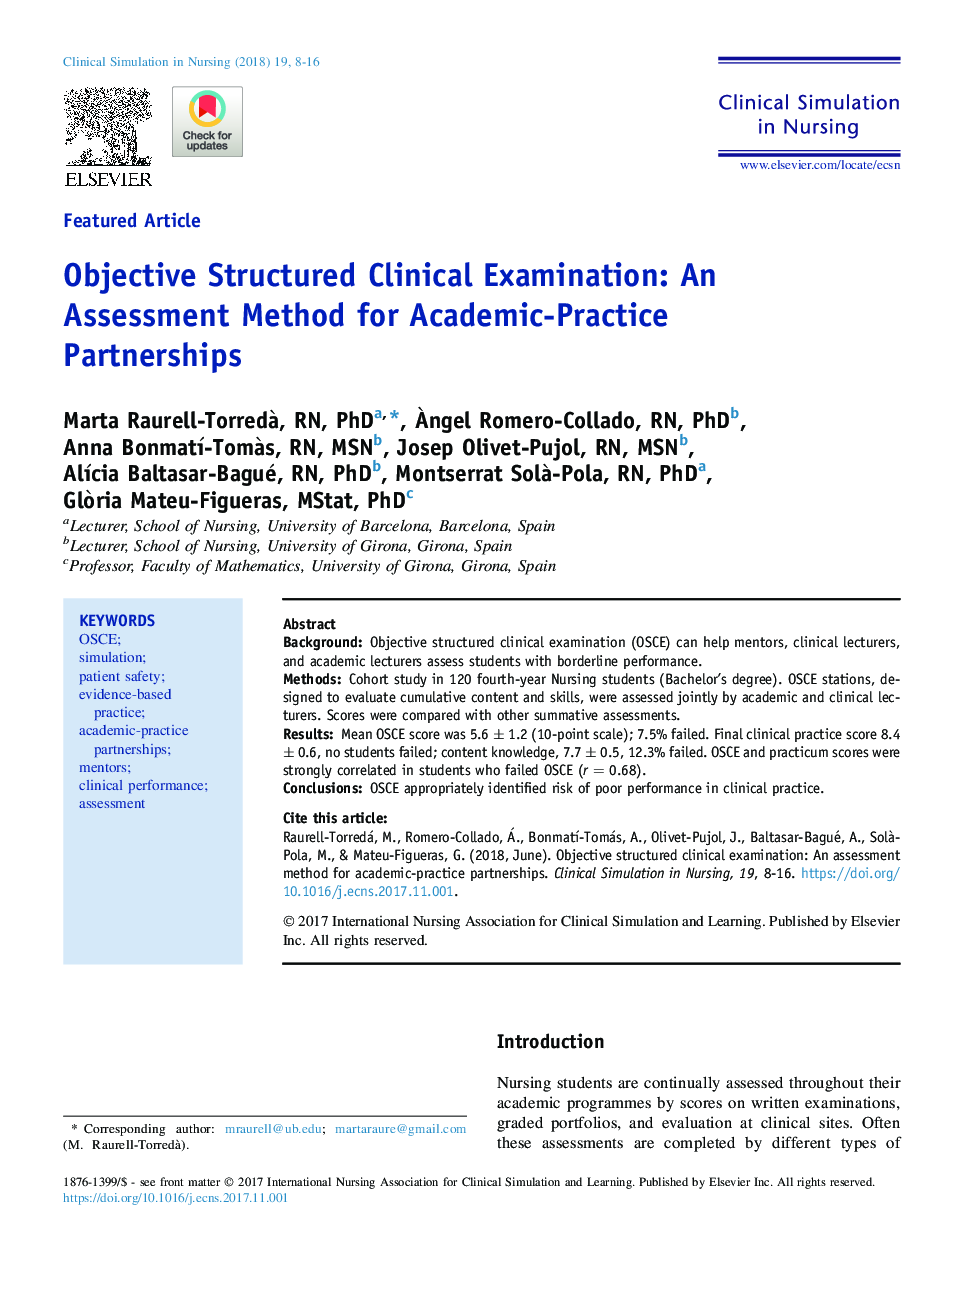 Objective Structured Clinical Examination: An Assessment Method for Academic-Practice Partnerships